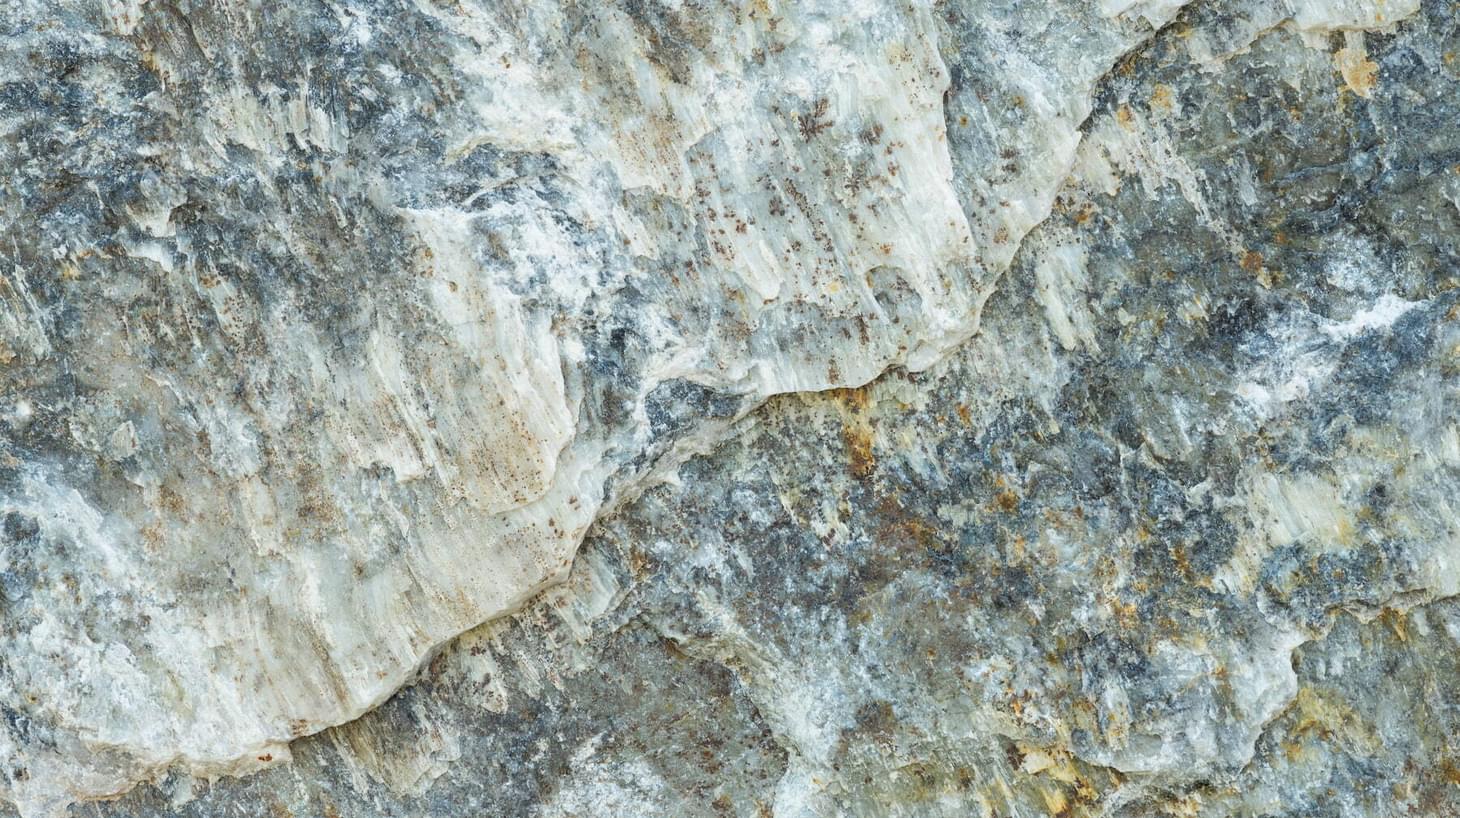 A close-up image of granite texture